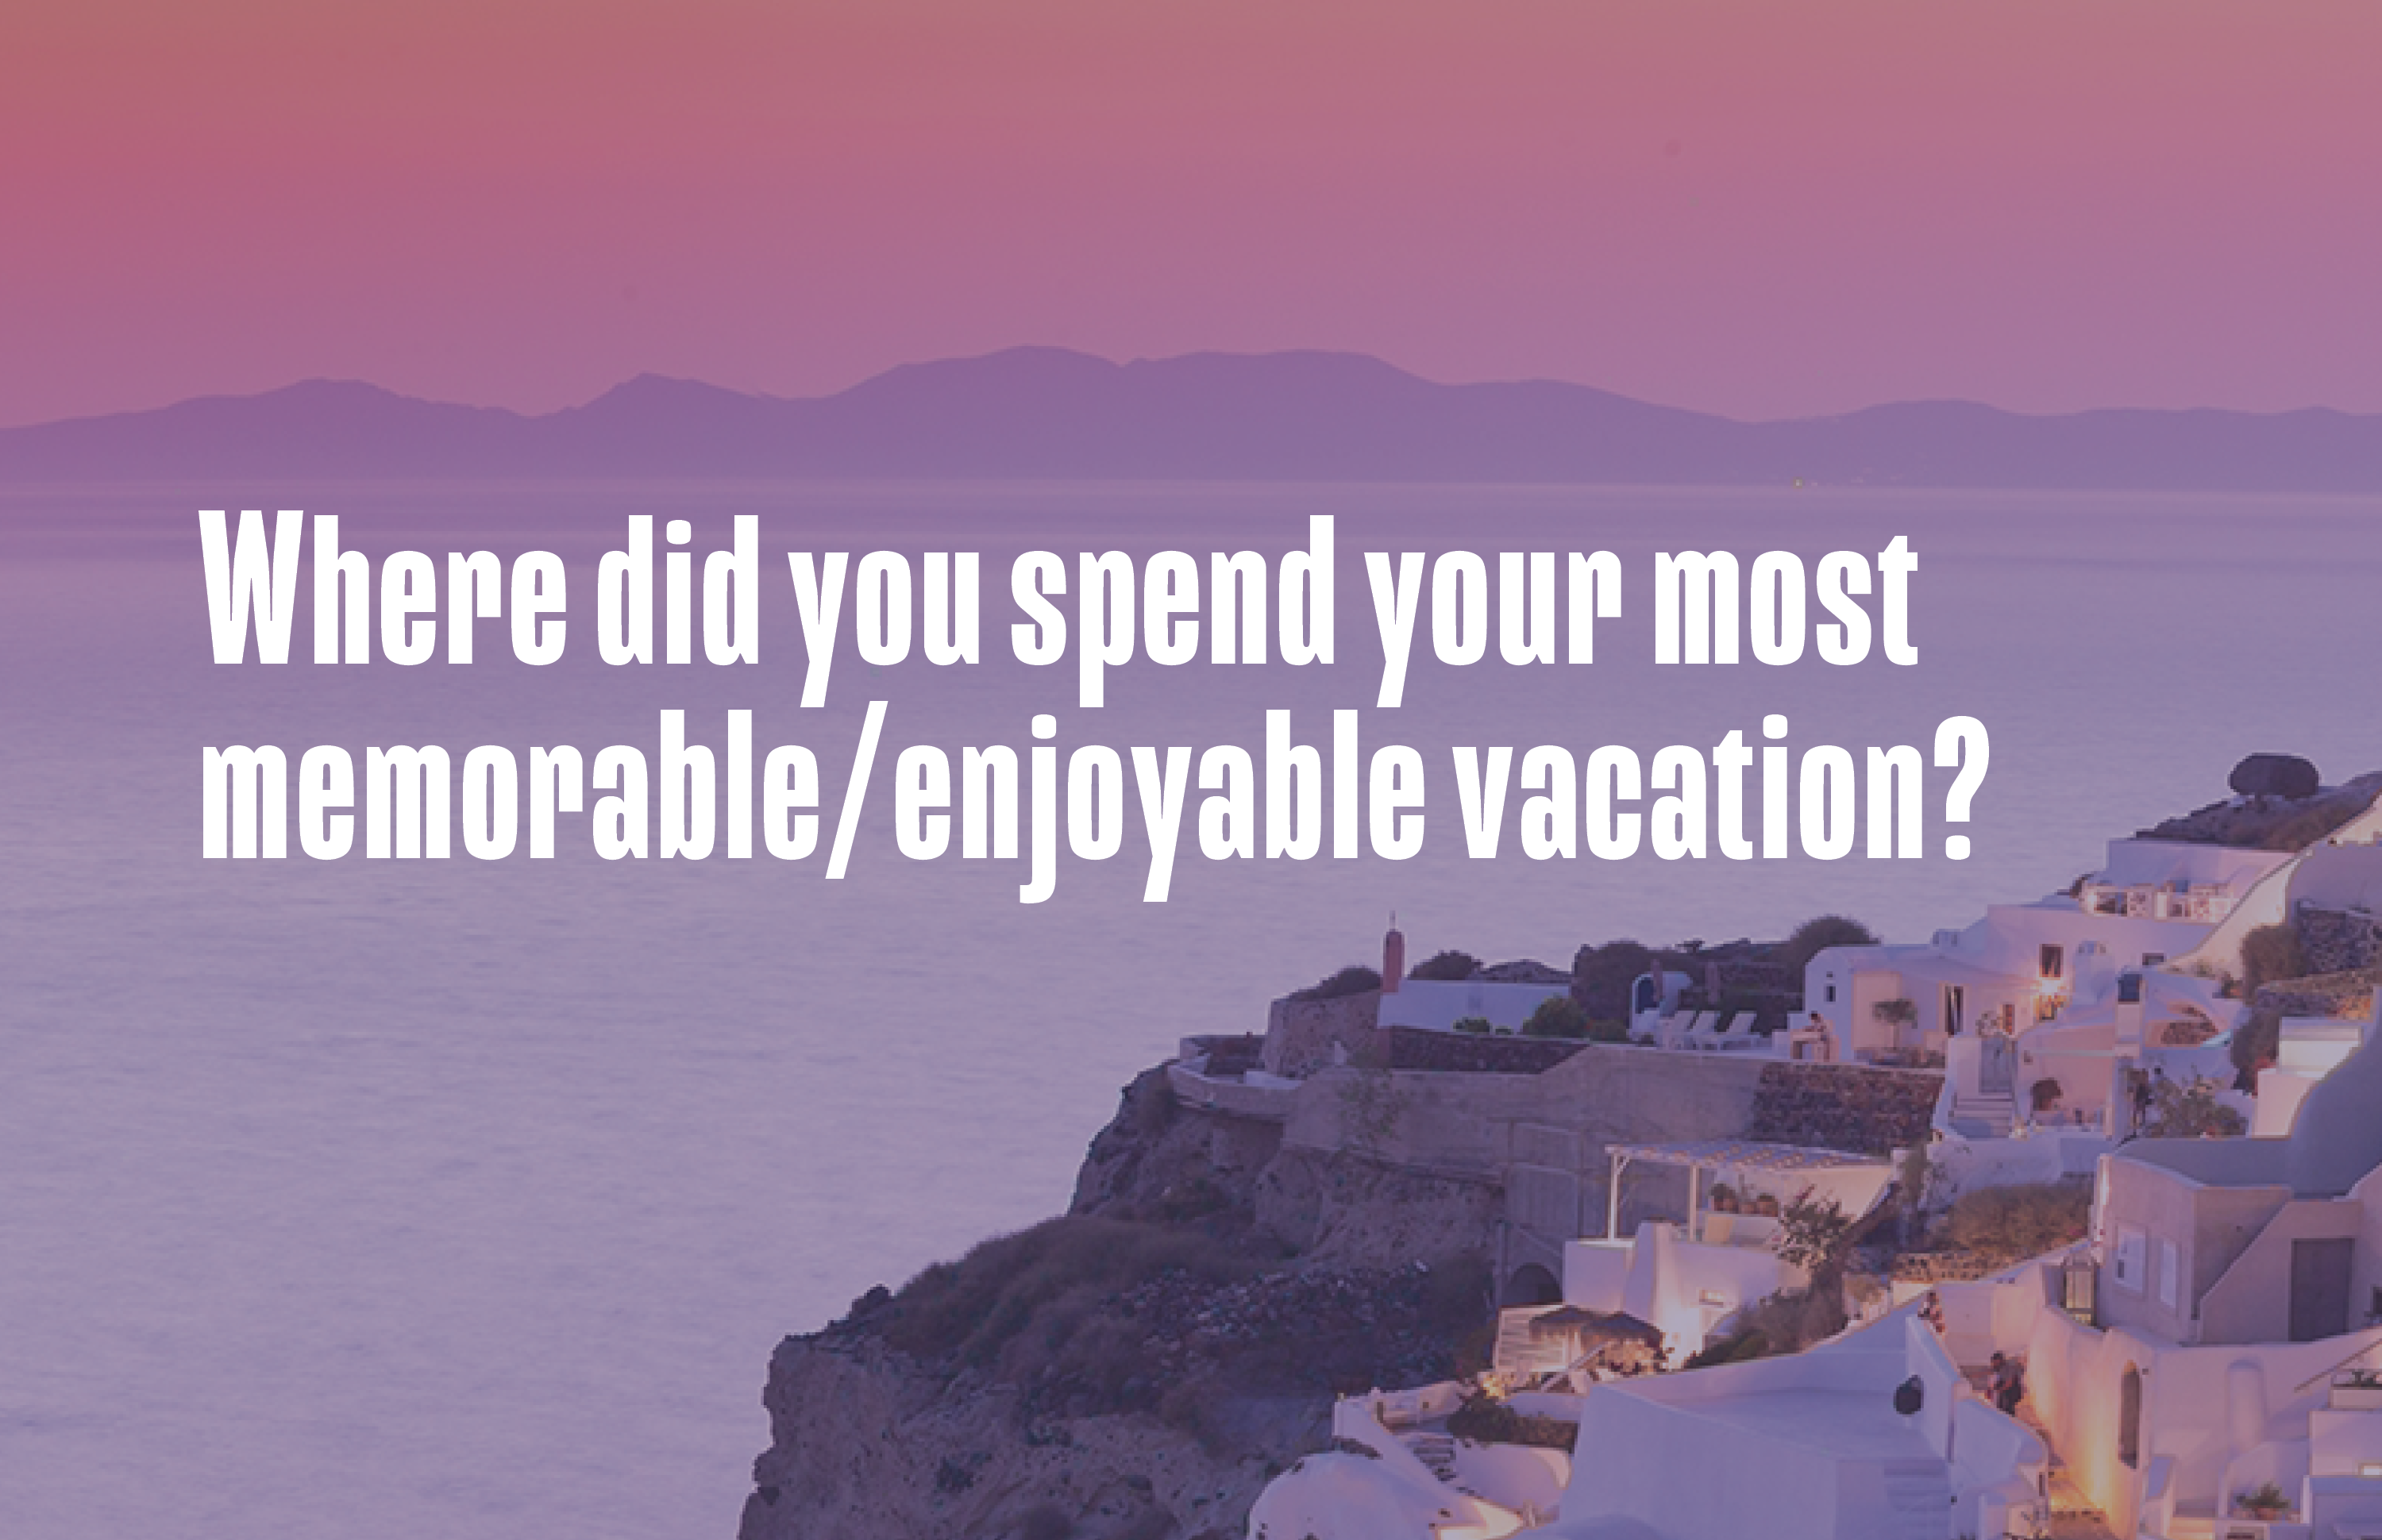 Physicians tell us their favorite vacation spots: Exclusive poll results